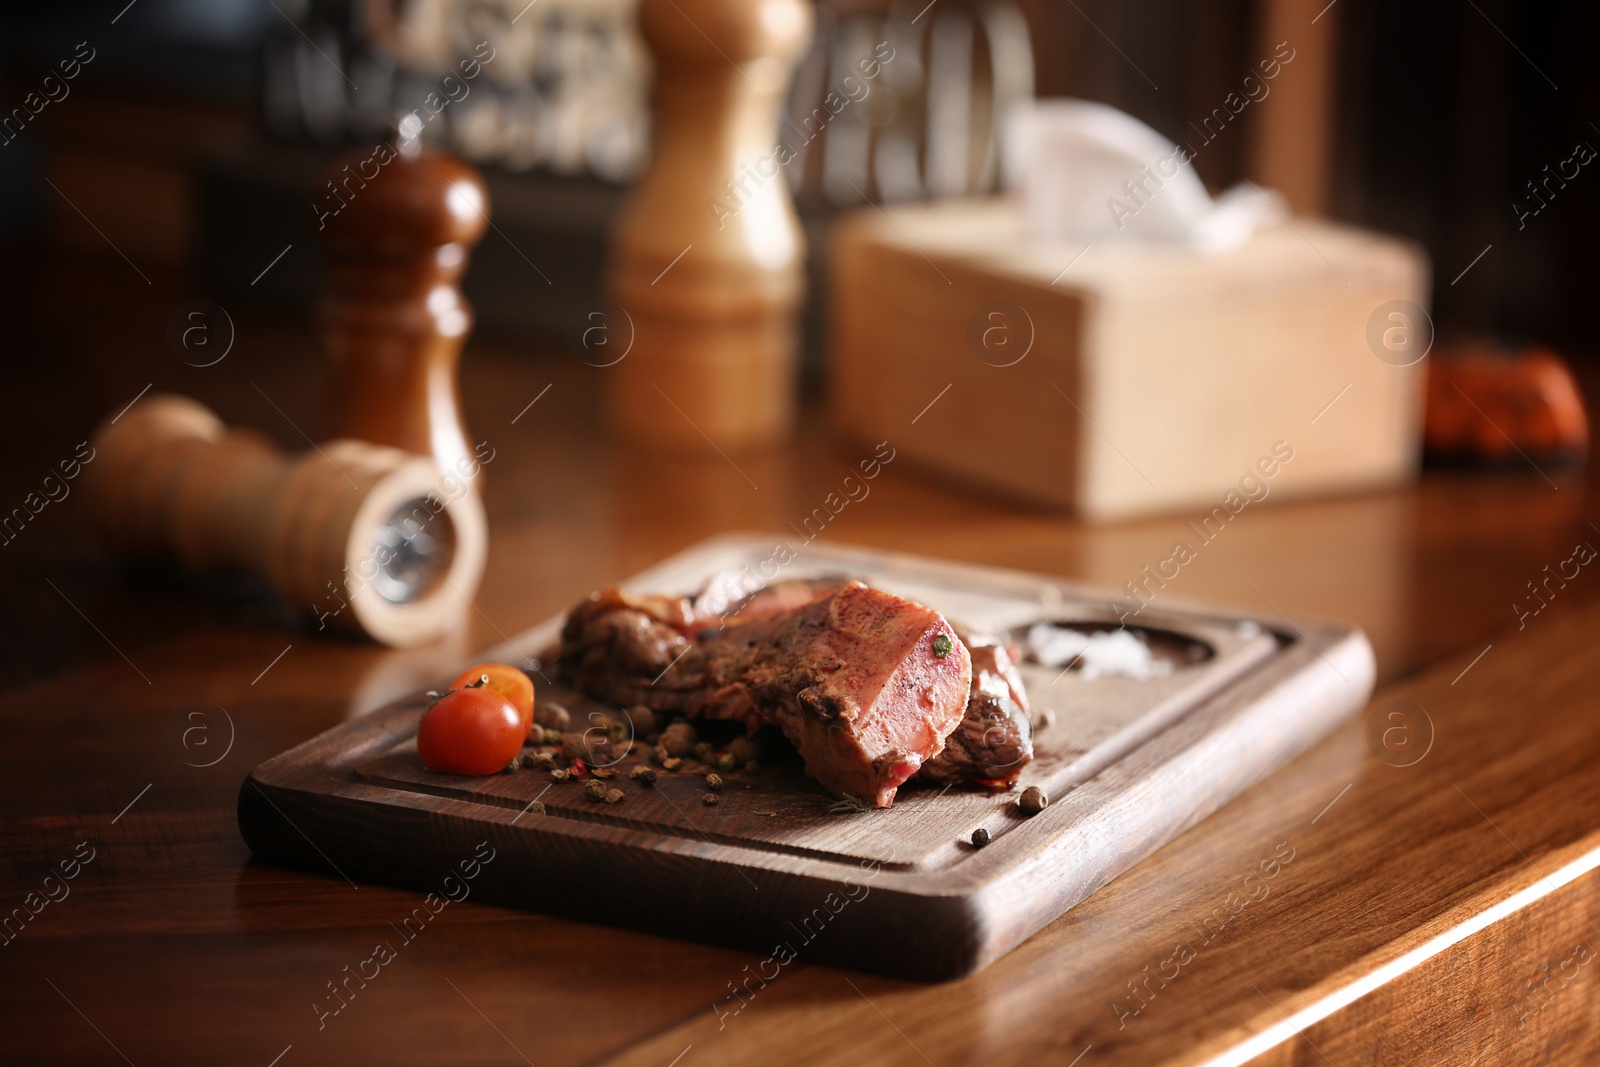 Photo of Tasty roasted meat served on wooden table. Cooking food